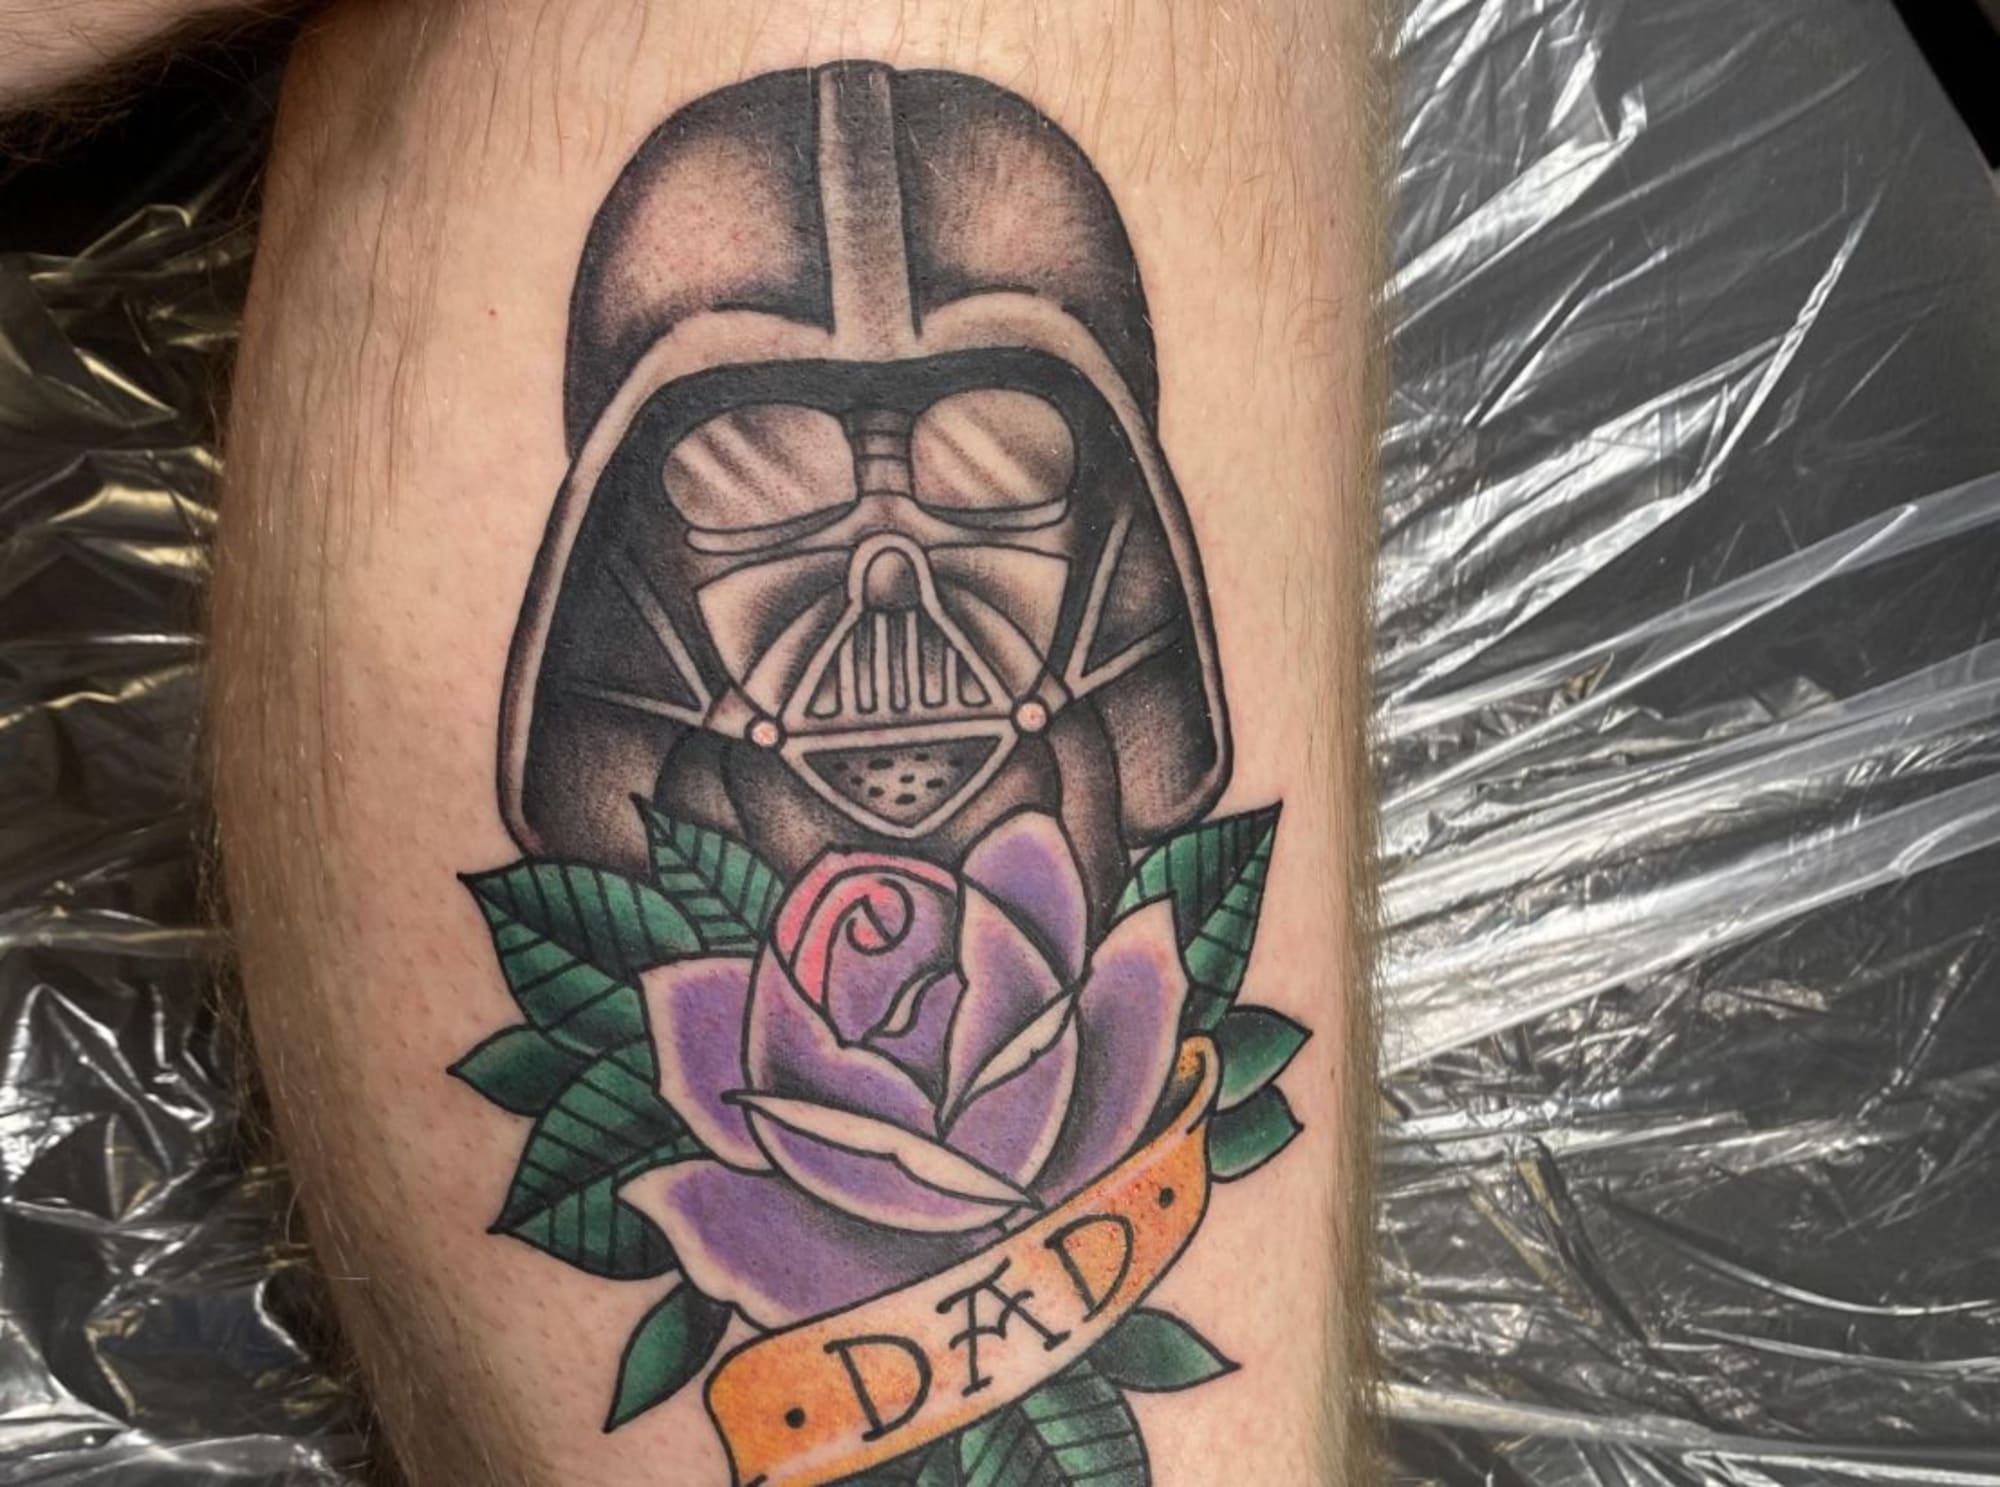 20 jaw-dropping Star Wars tattoos - Page 3